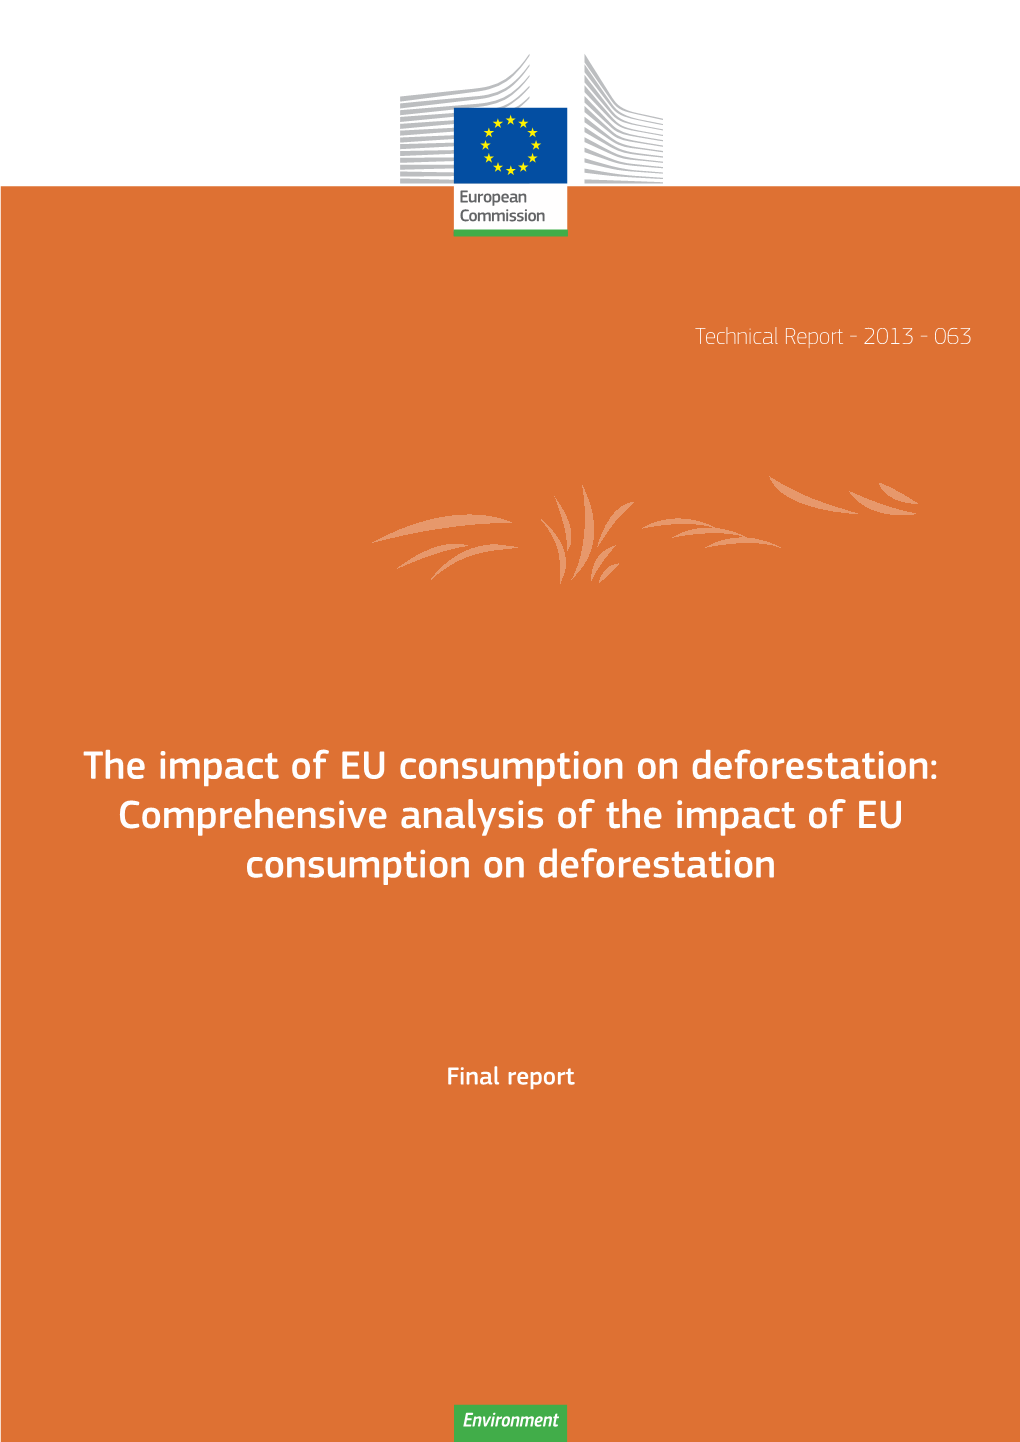 Analysis of the Impact of EU Consumption on Deforestation